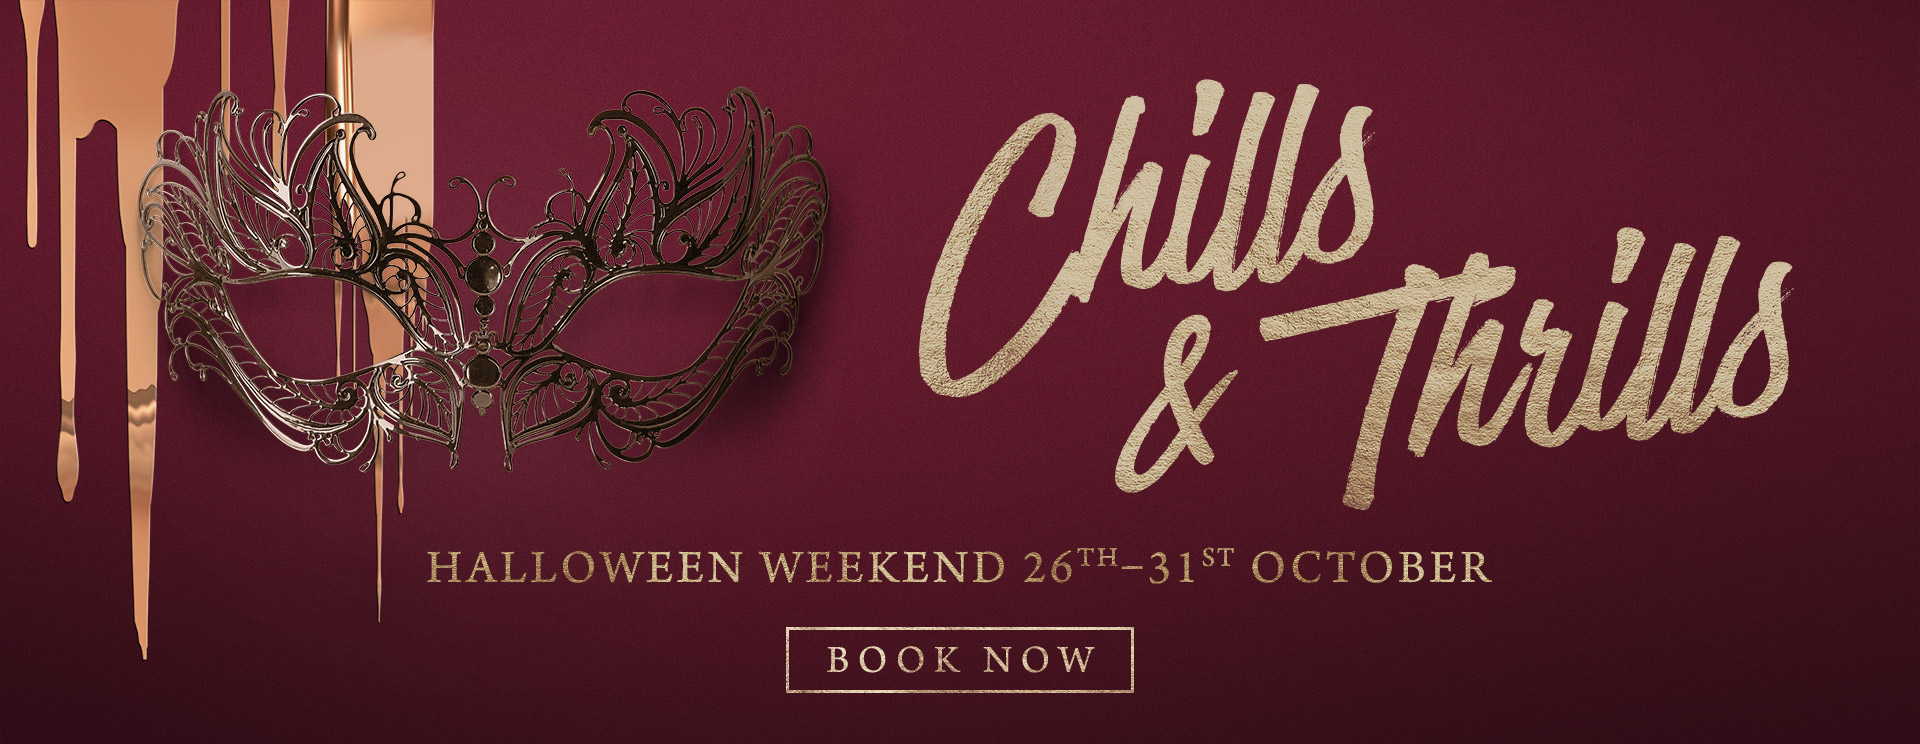 Chills & Thrills this Halloween at The Gate